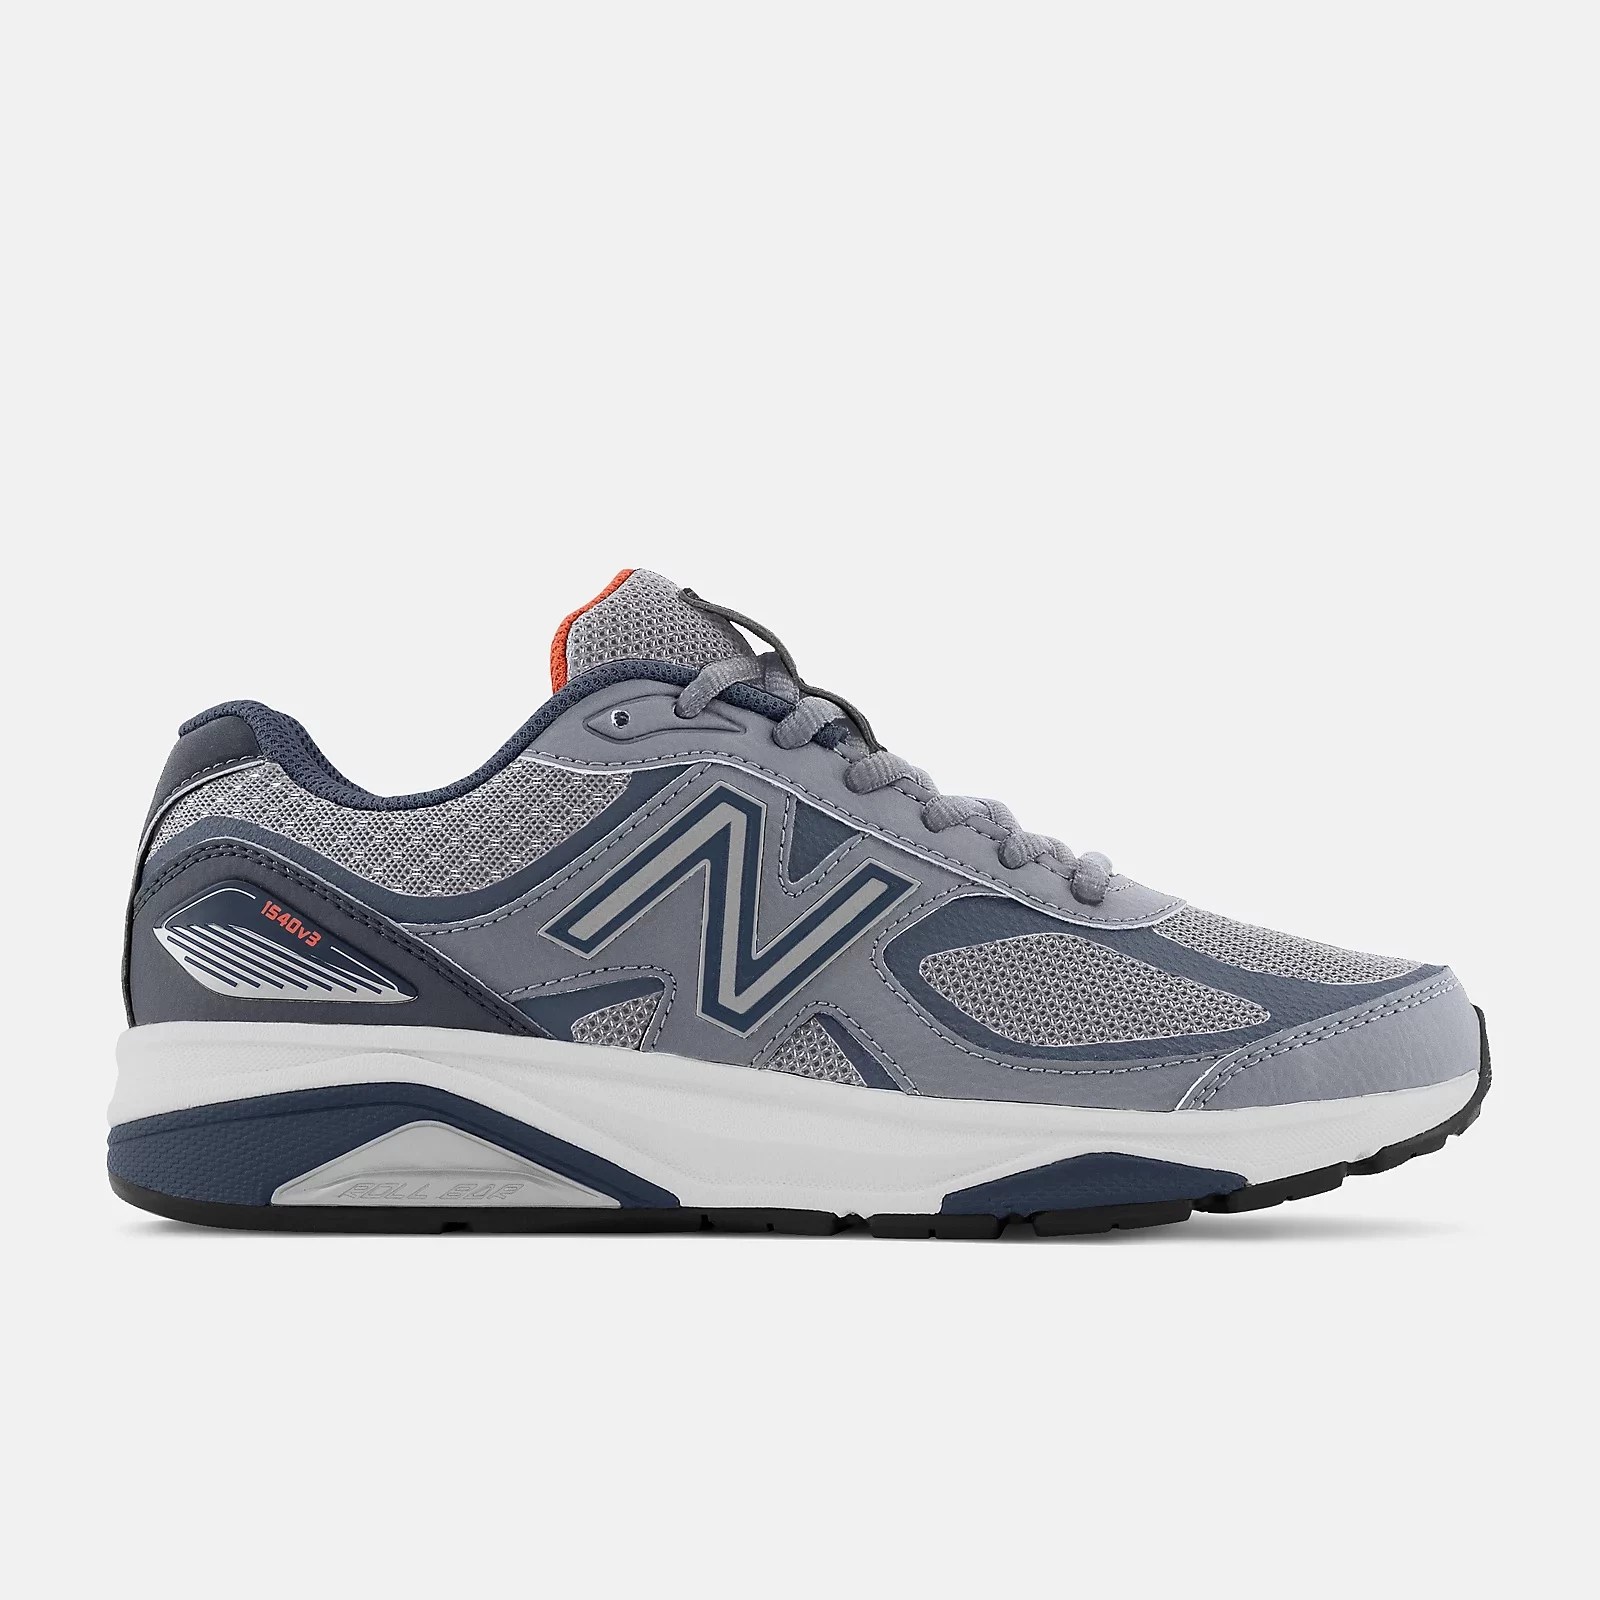 New Balance 1540v3, best sneakers for ankle support